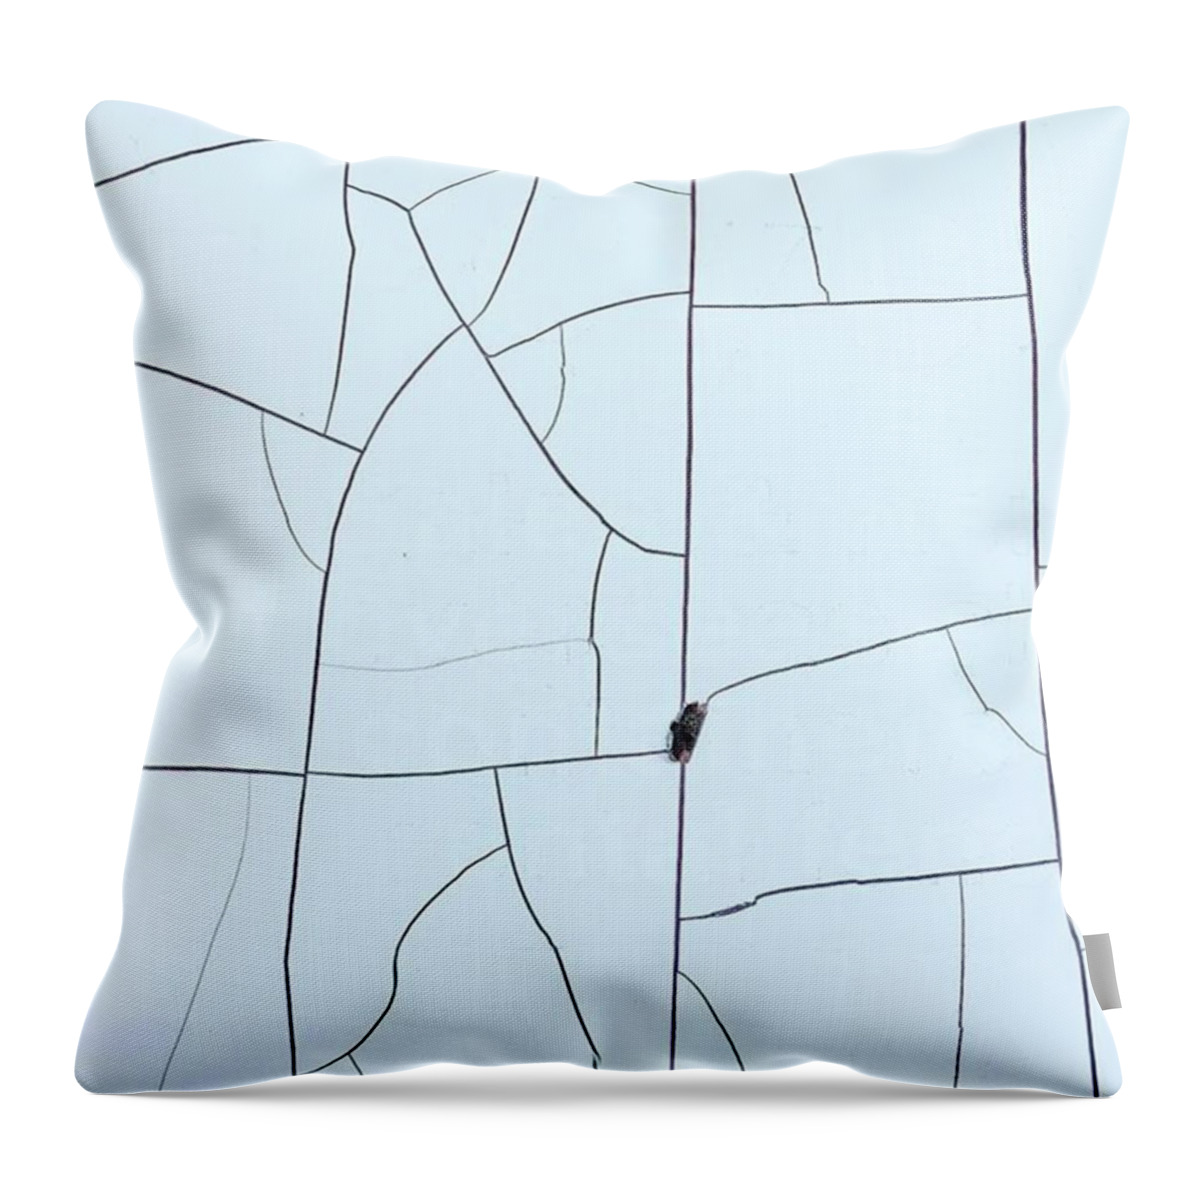 Paintcrackle Throw Pillow featuring the photograph Rural Roads And Snowy Fields From by Ginger Oppenheimer